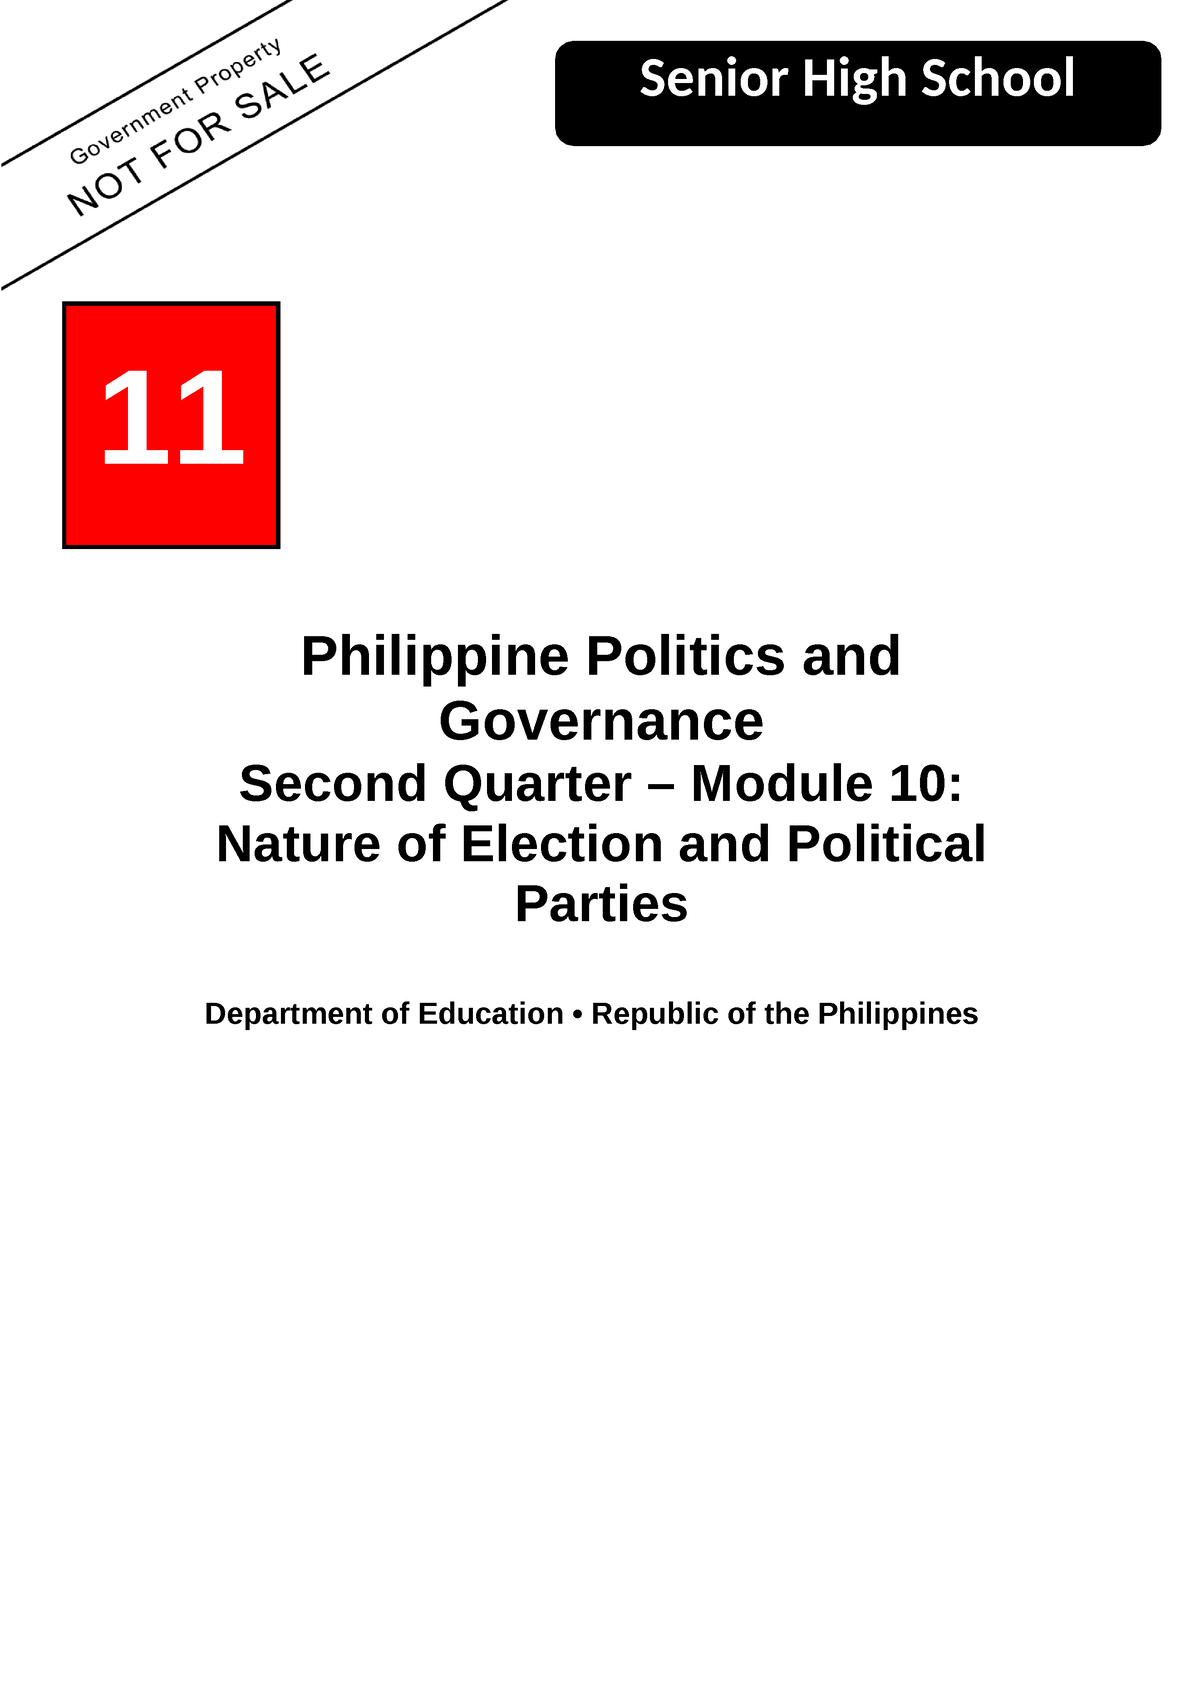 Nature Of Elections And Political Parties Q2 Module 10 Shs Ppg Melc10 Senior High School 6192